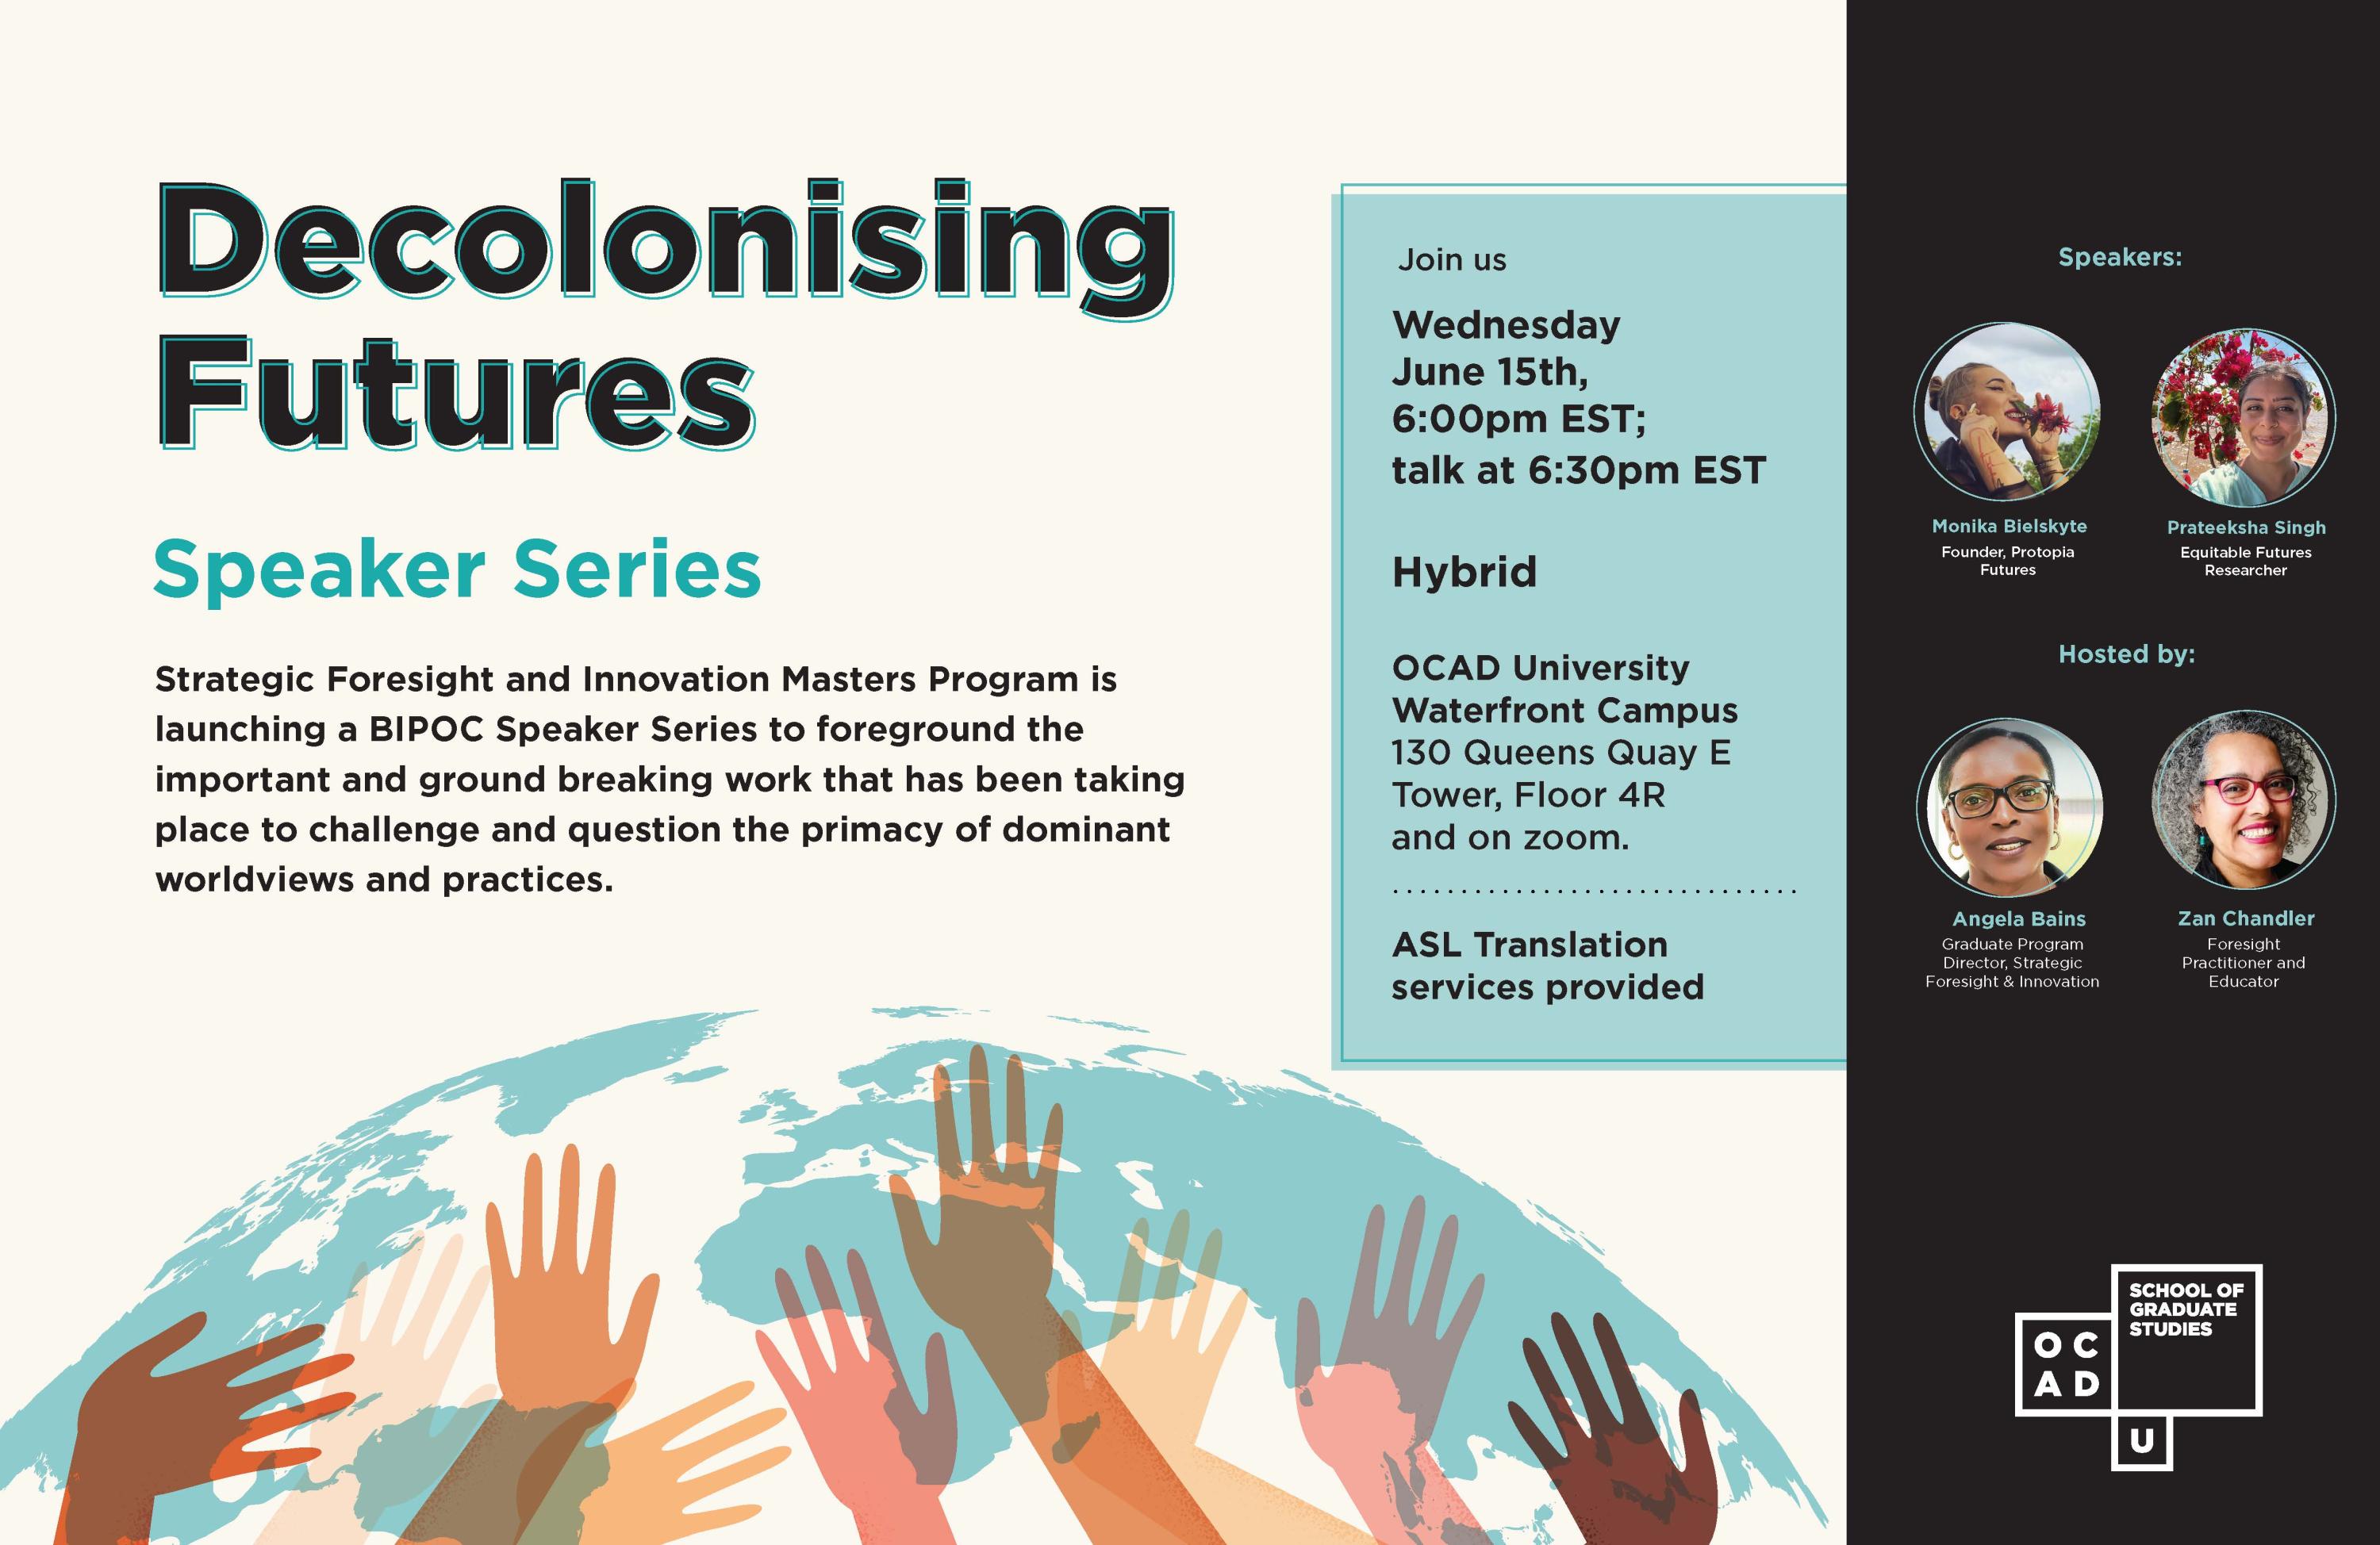 SFI BIPOC Speaker Series: Decolonising Futures Wednesday, June 15th 20225:30PM SFI VIP Class Reception Event 6:30PM Online and In-Person Talk starts International Speakers: Monika Bielskyte Founder, PROTOPIA FUTURES Prateeksha Singh Equitable Futures Researcher